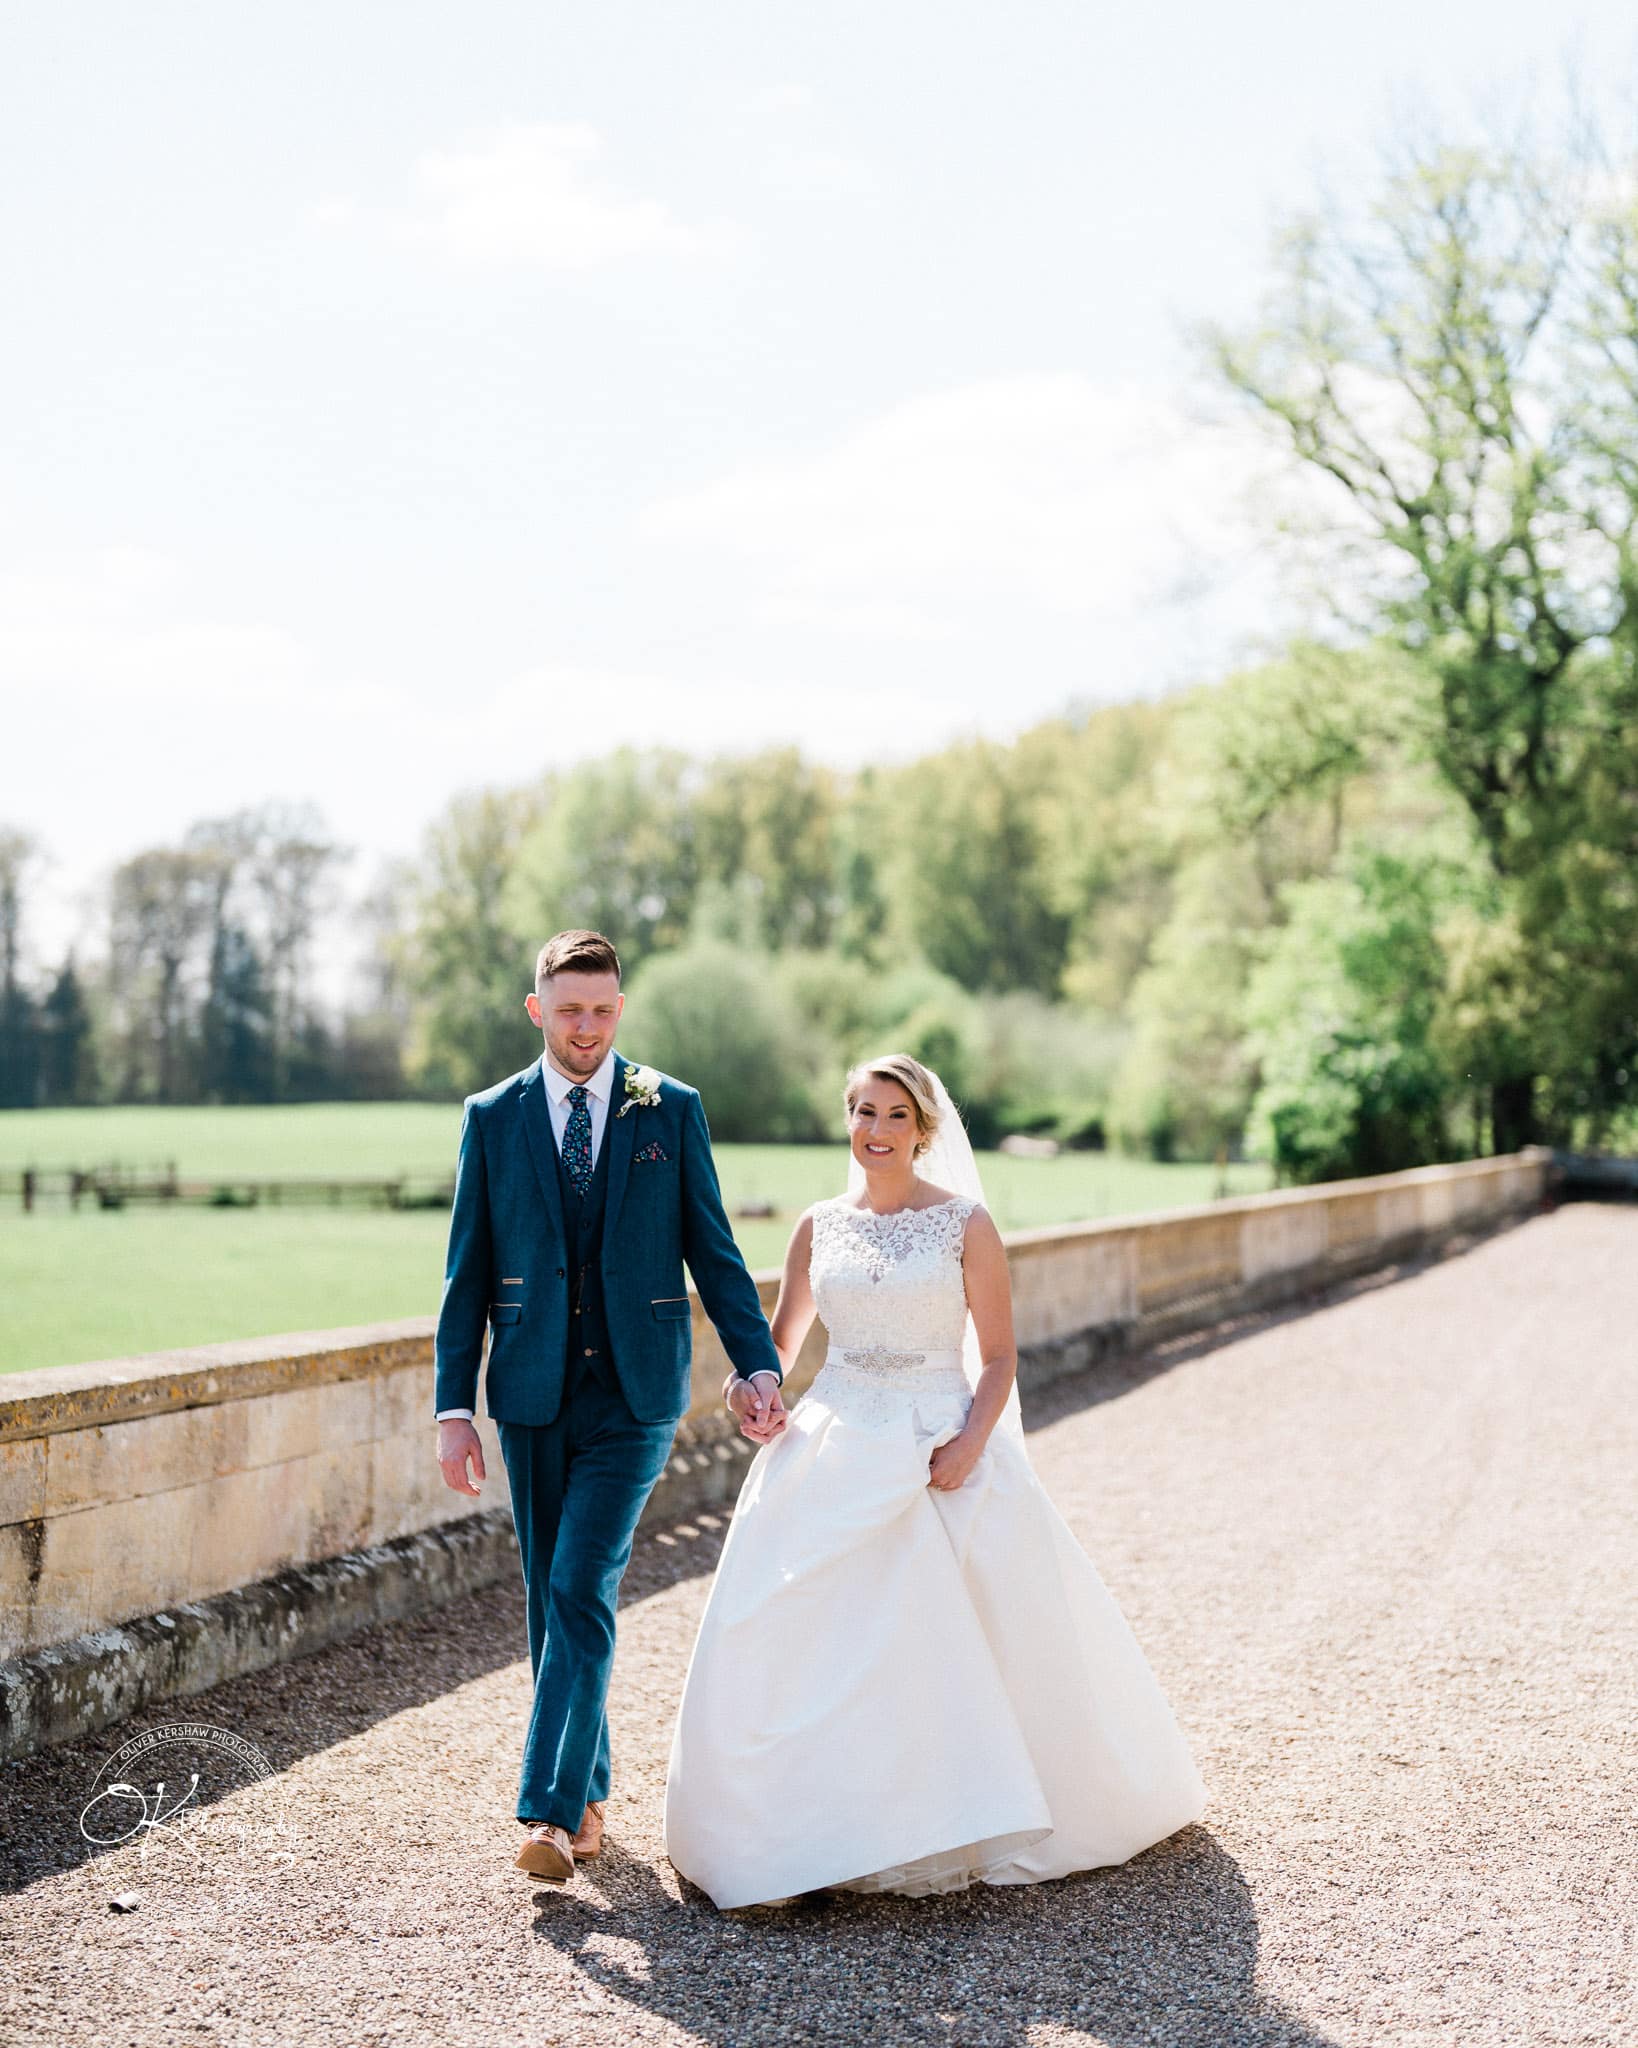 Wedding Photography at Prestwold Hall